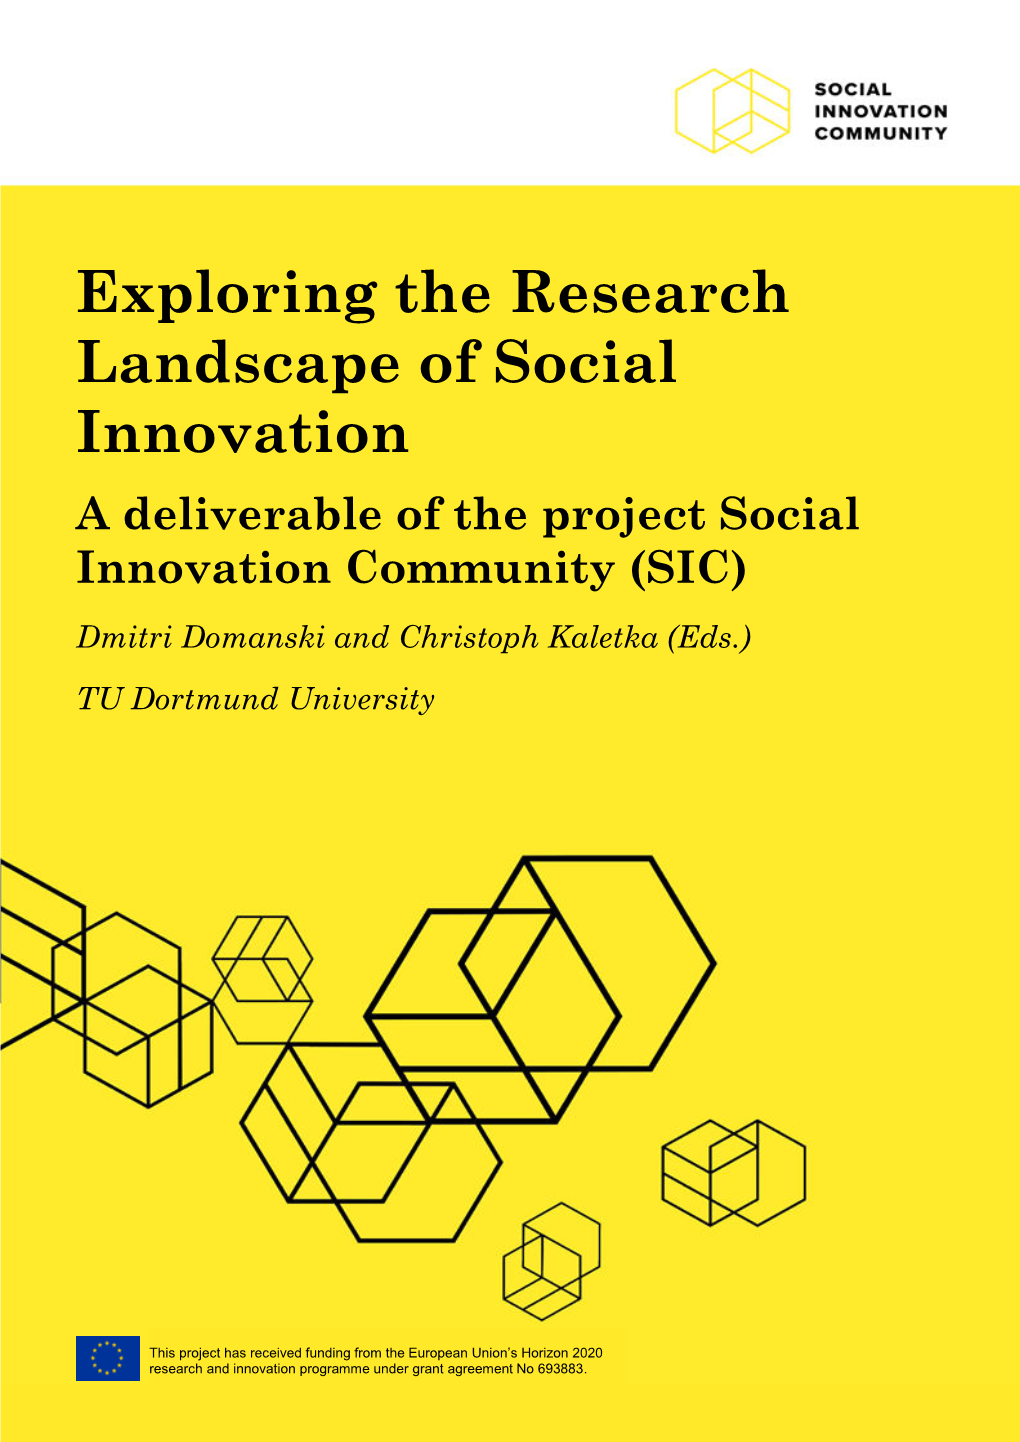 Exploring the Research Landscape of Social Innovation a Deliverable of the Project Social Innovation Community (SIC)